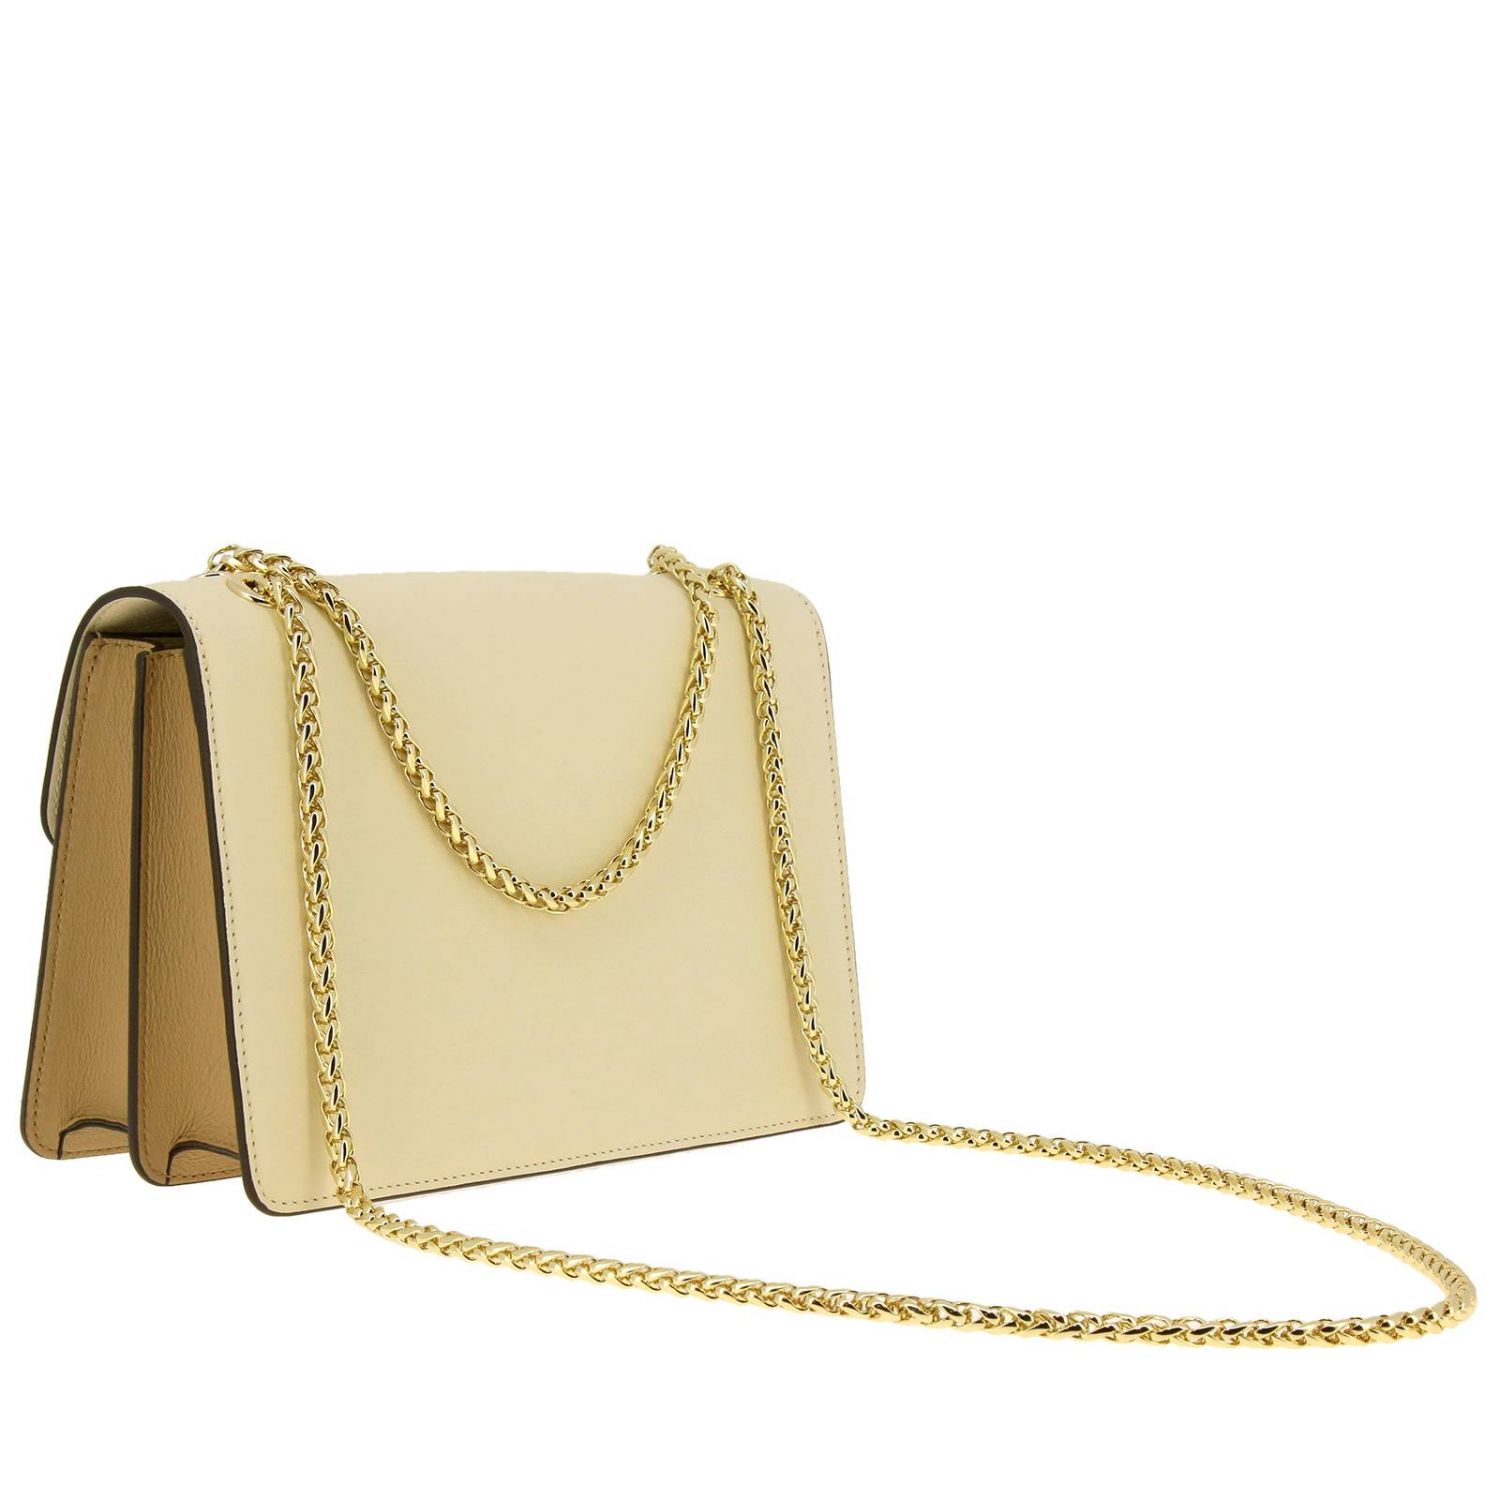 STRATHBERRY: mini bag for woman - Beige | Strathberry mini bag EAST ...